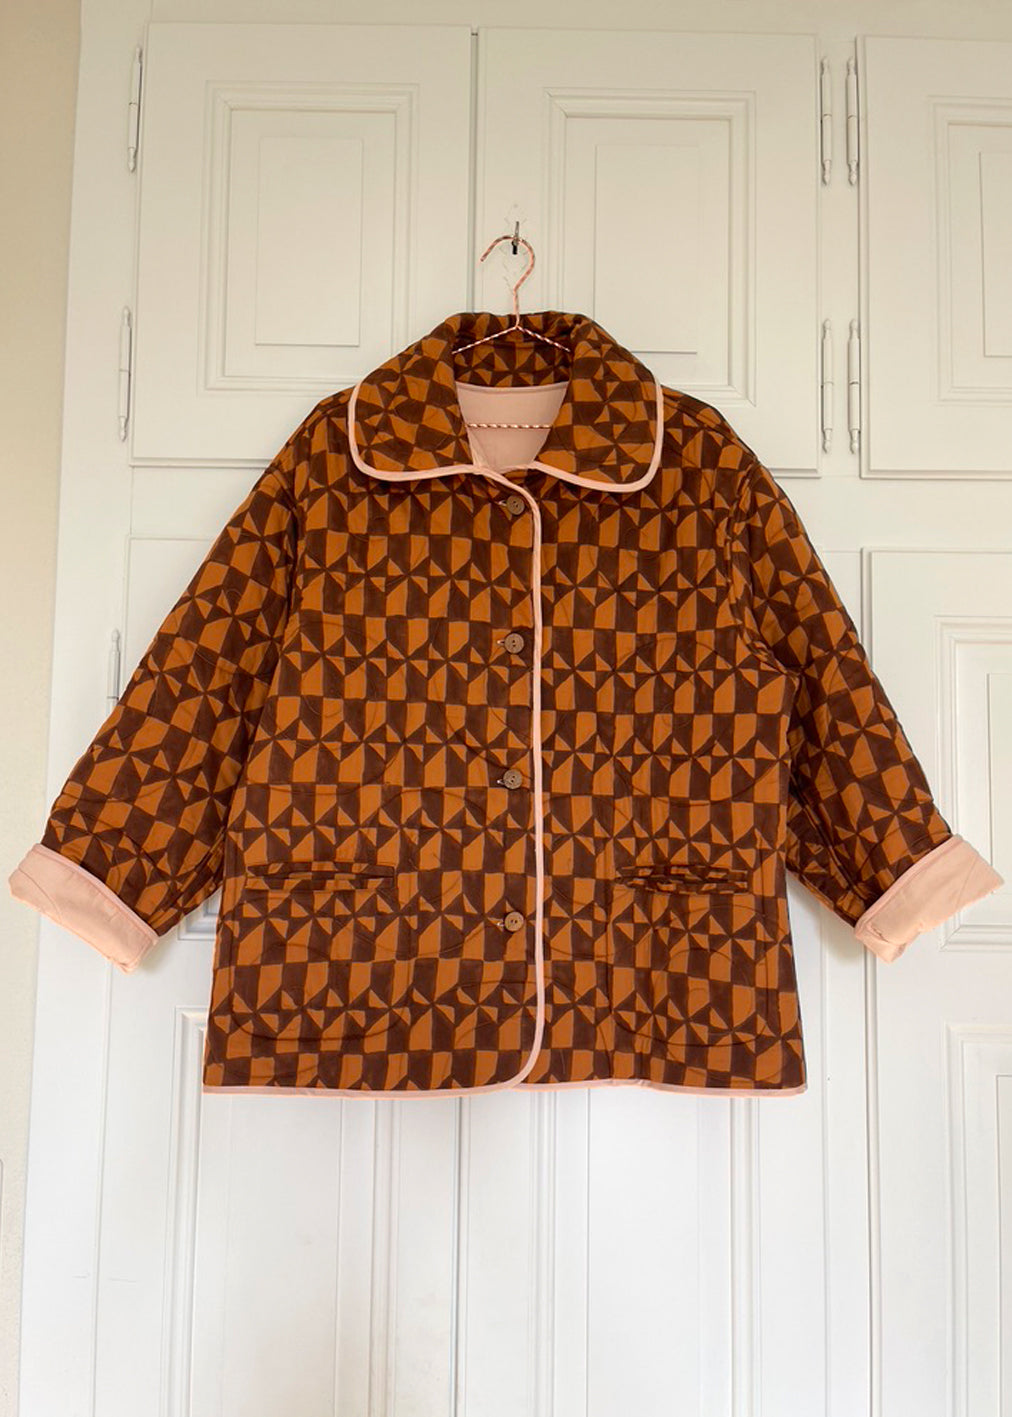 Shell and Tile reversible jacket